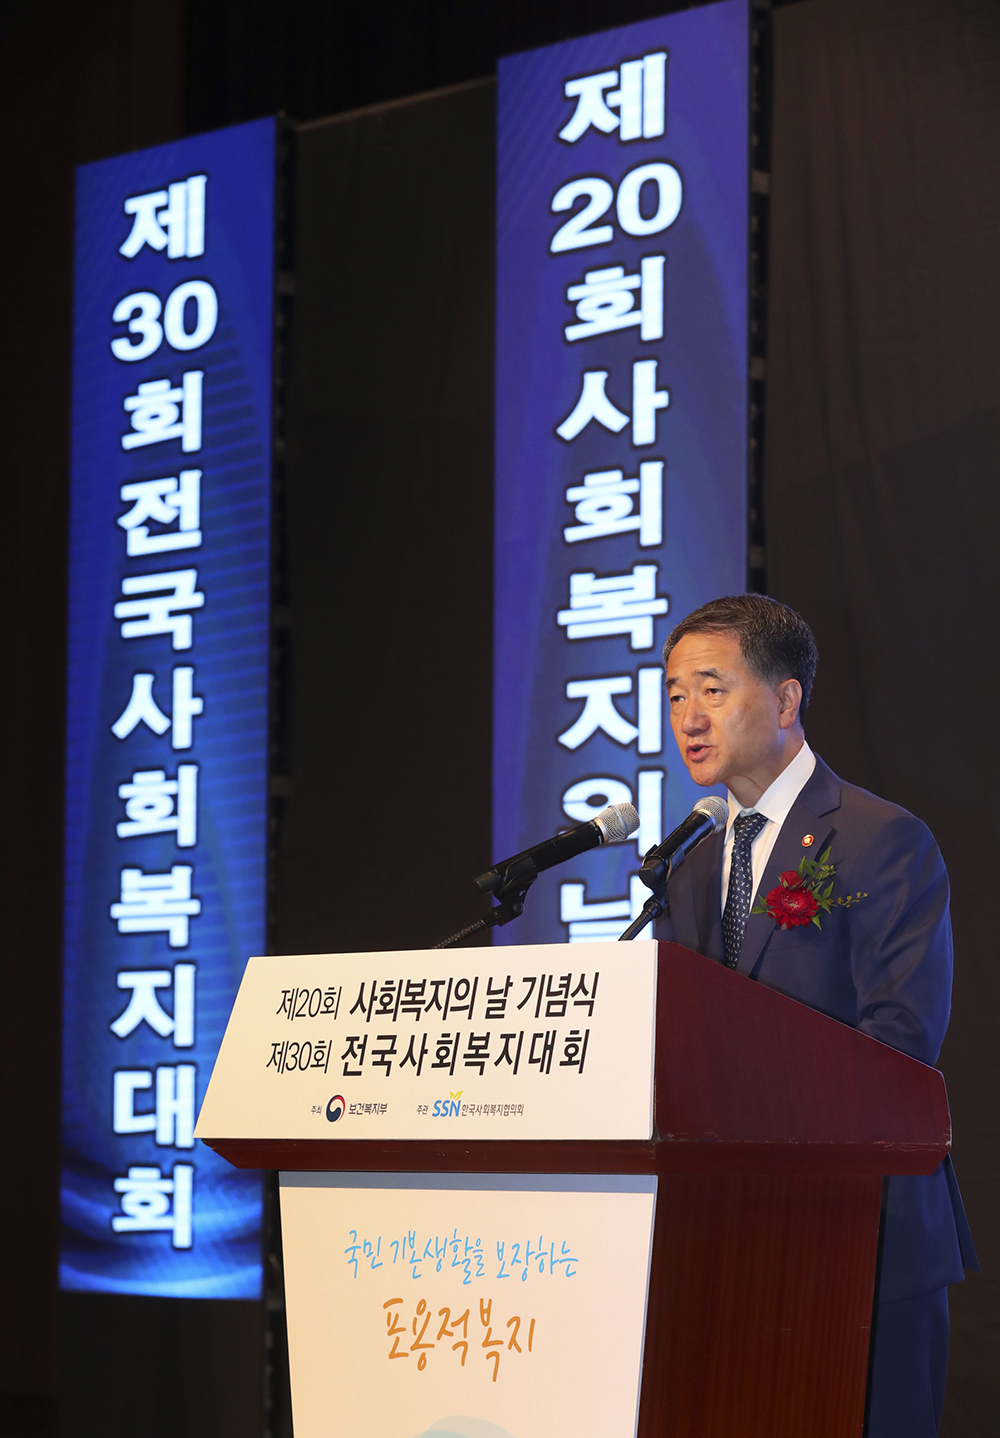 20th Social Welfare Day (September 6) to Commemorate 20th Anniversary of National Basic Living Security Act 사진10